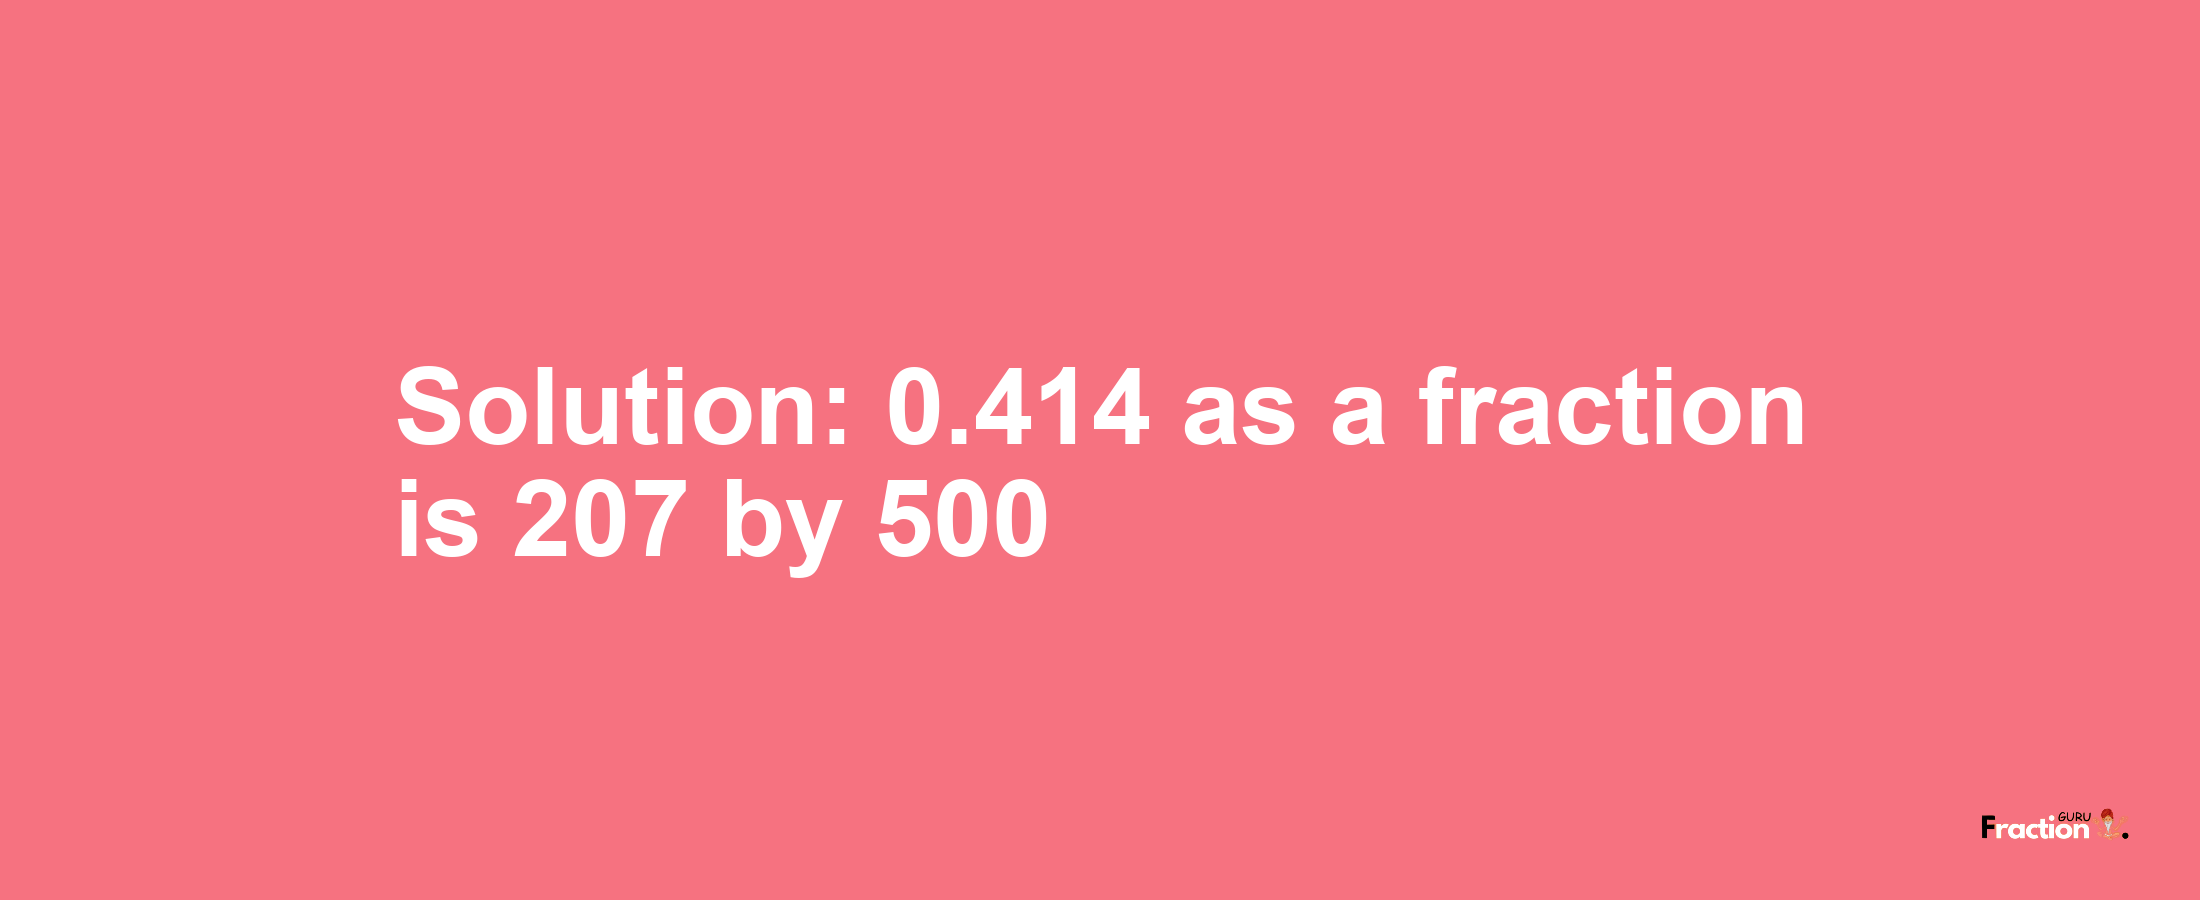 Solution:0.414 as a fraction is 207/500